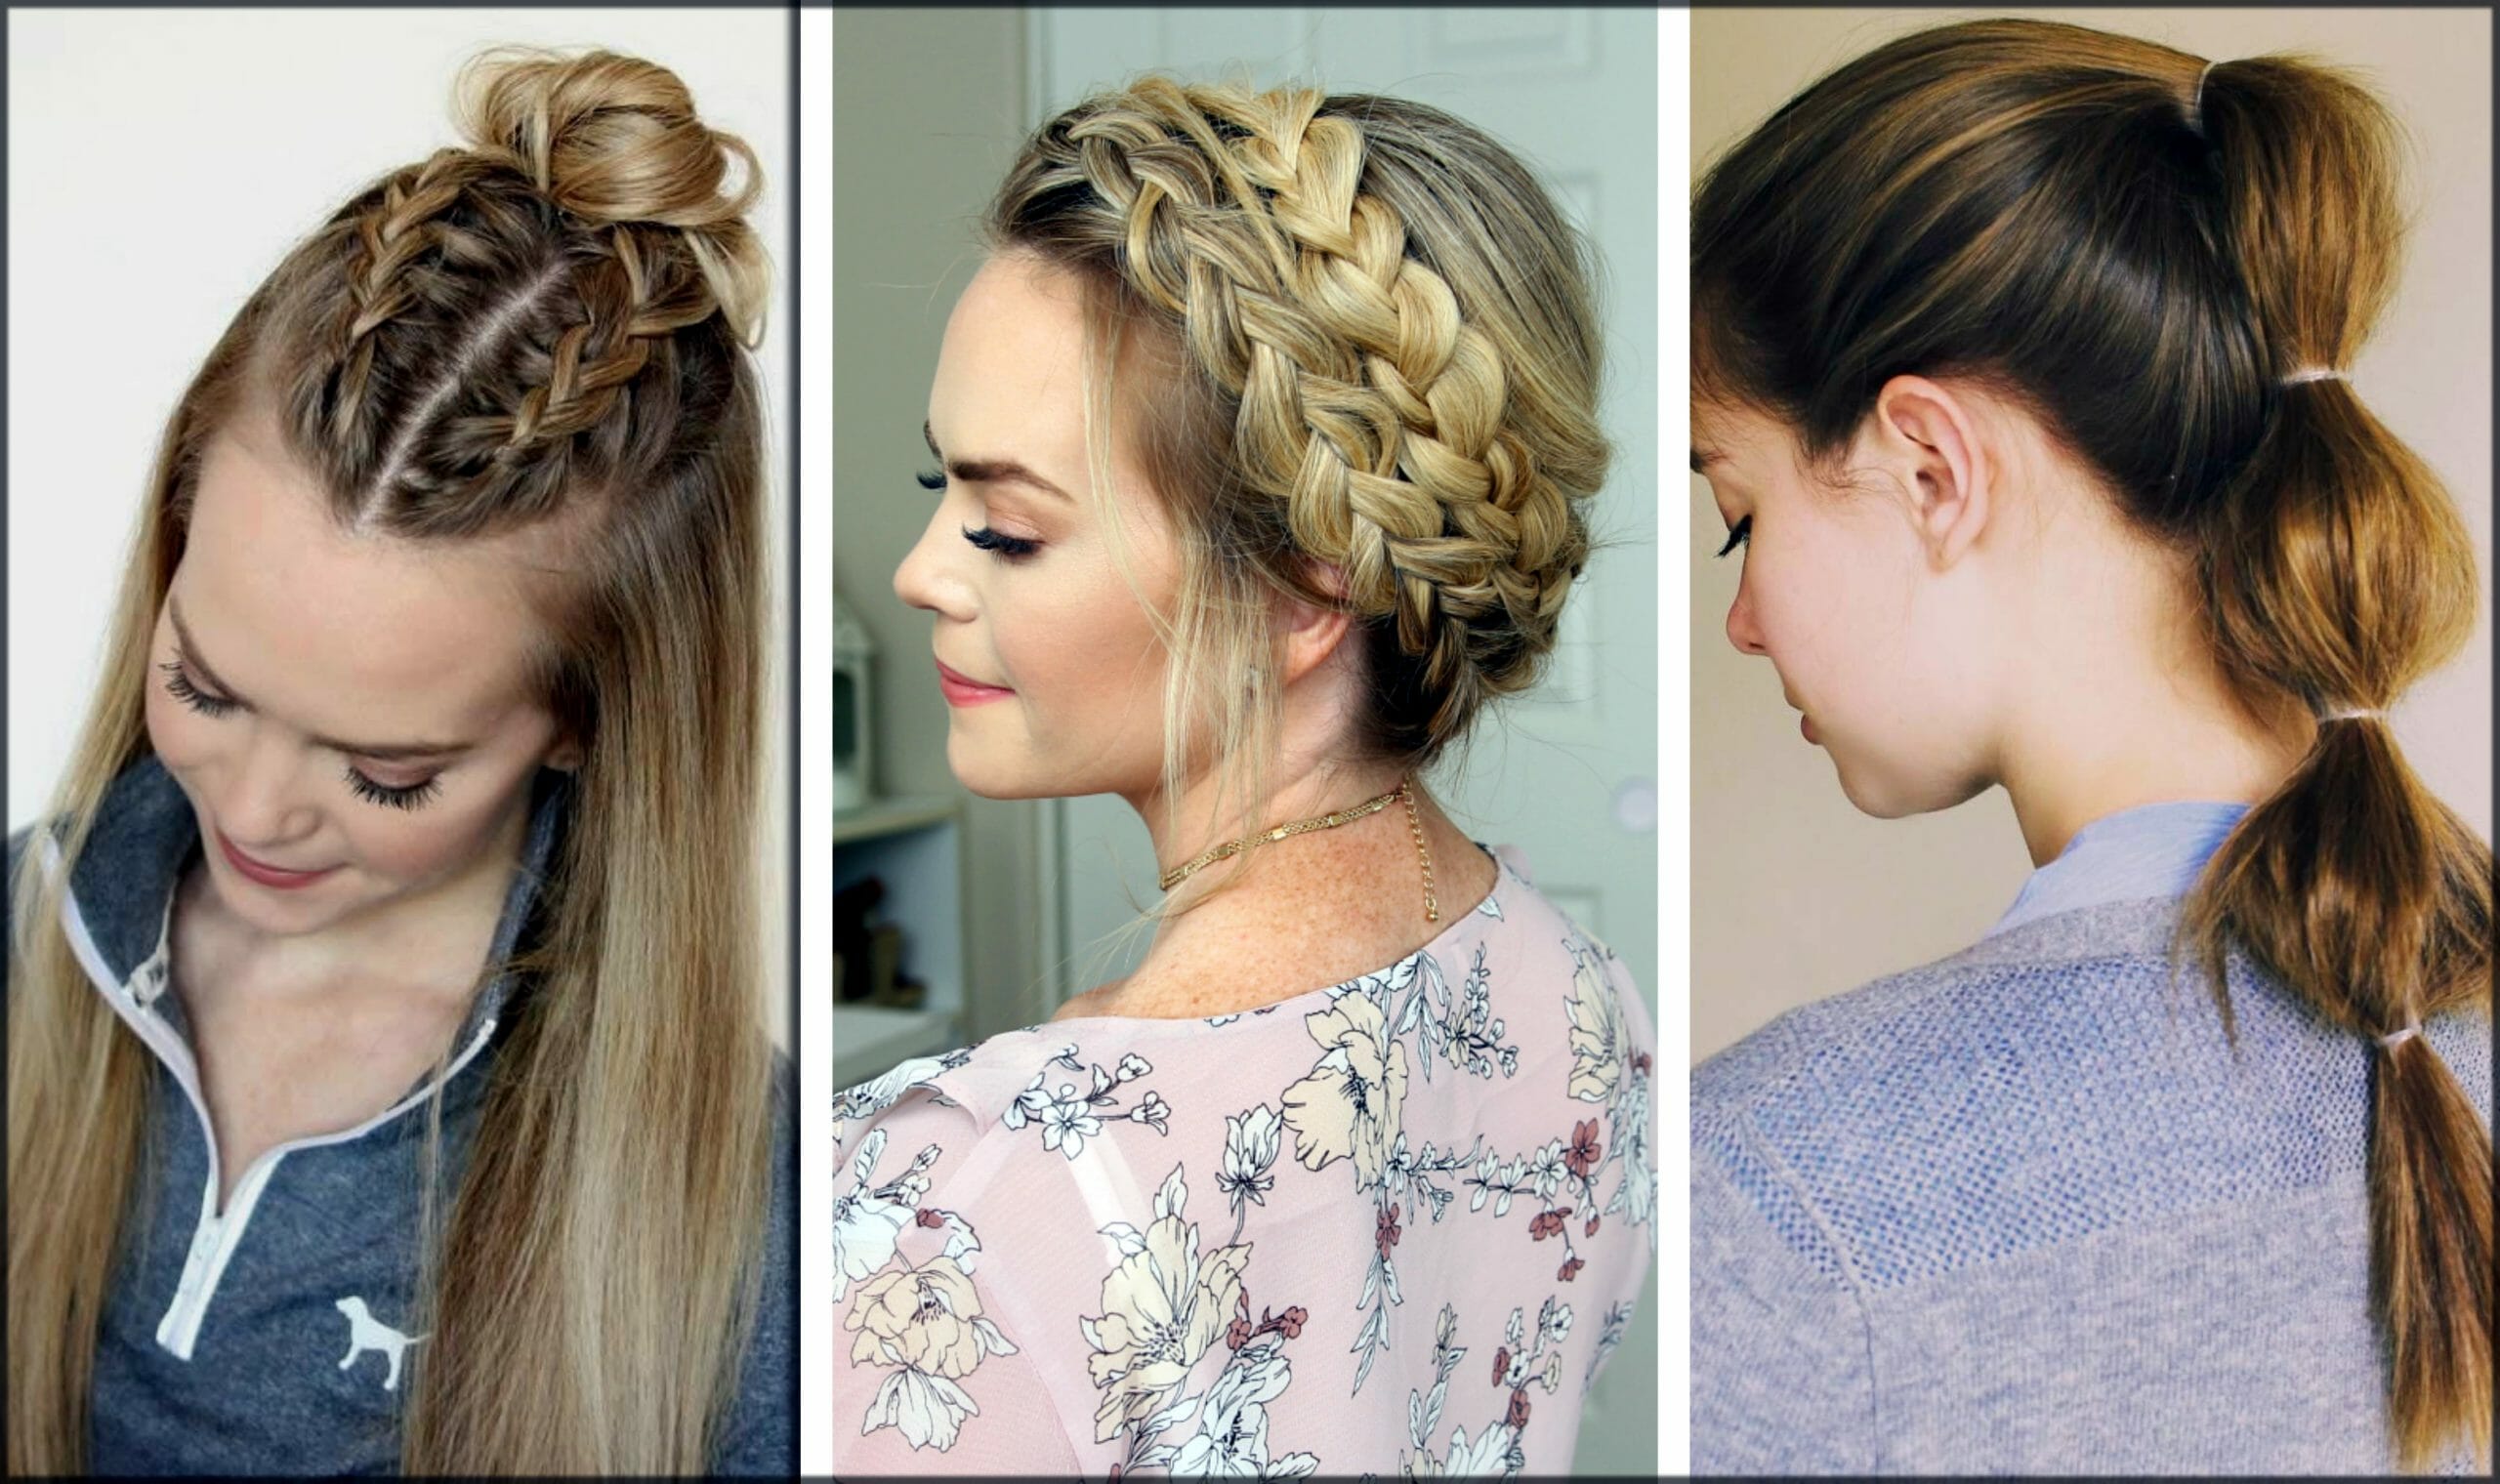 Try These Easy To Do Hairstyles For A Girls Night Out